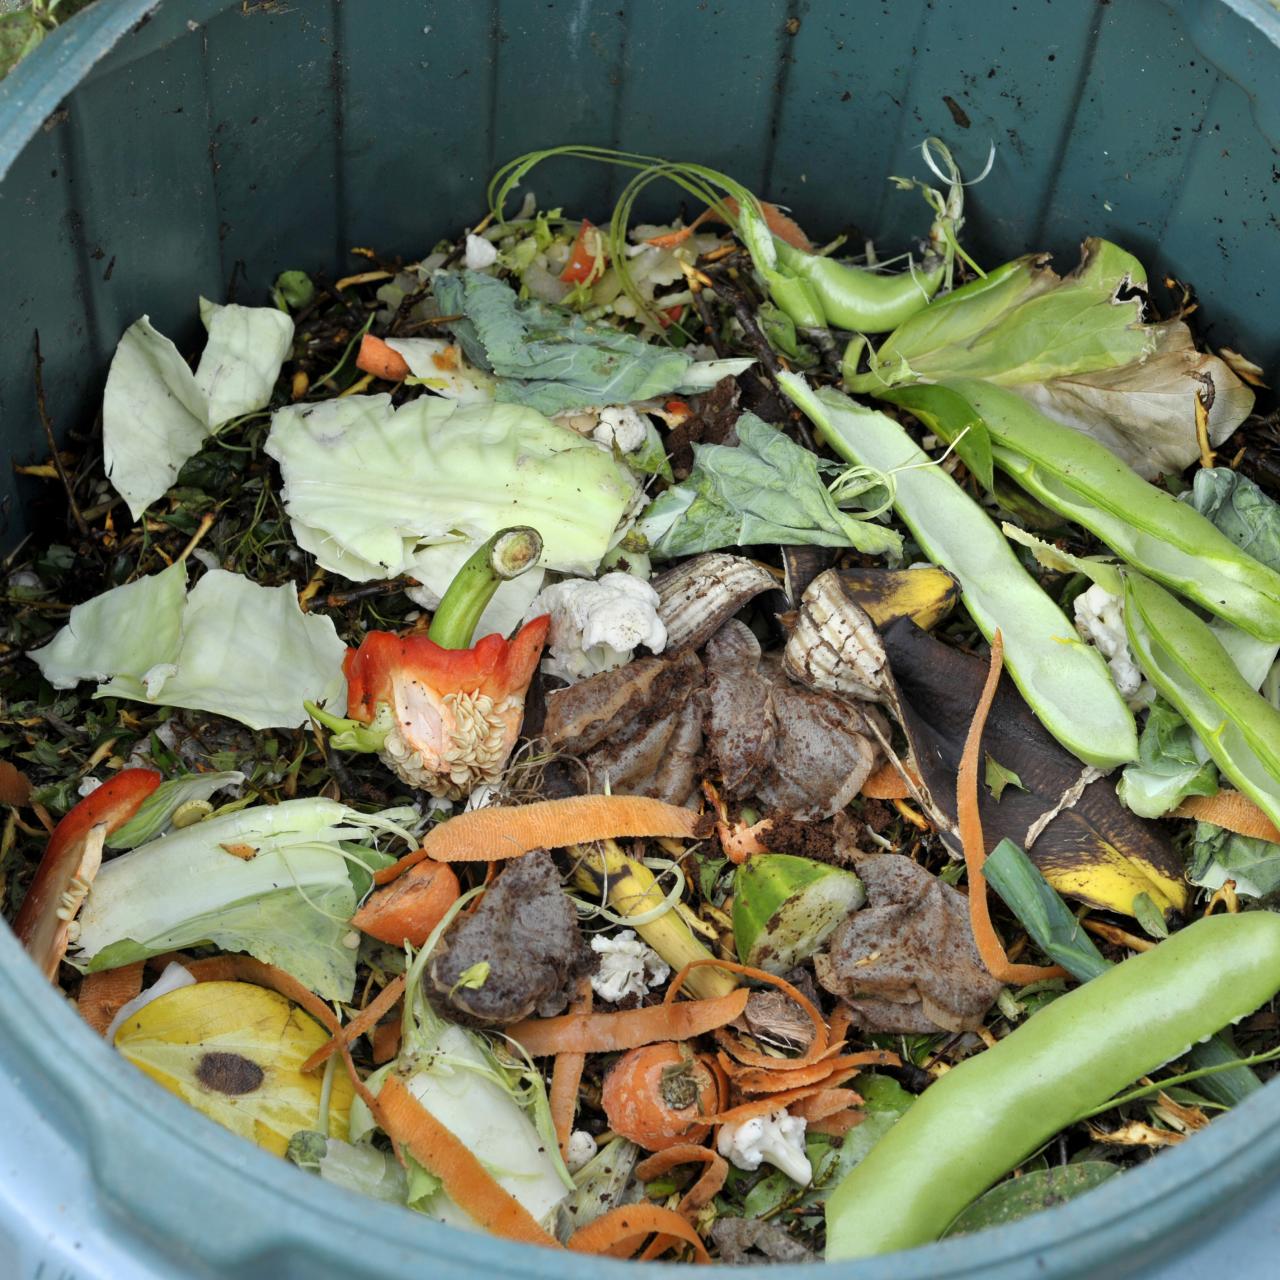 Types of Home Composting Methods and Systems